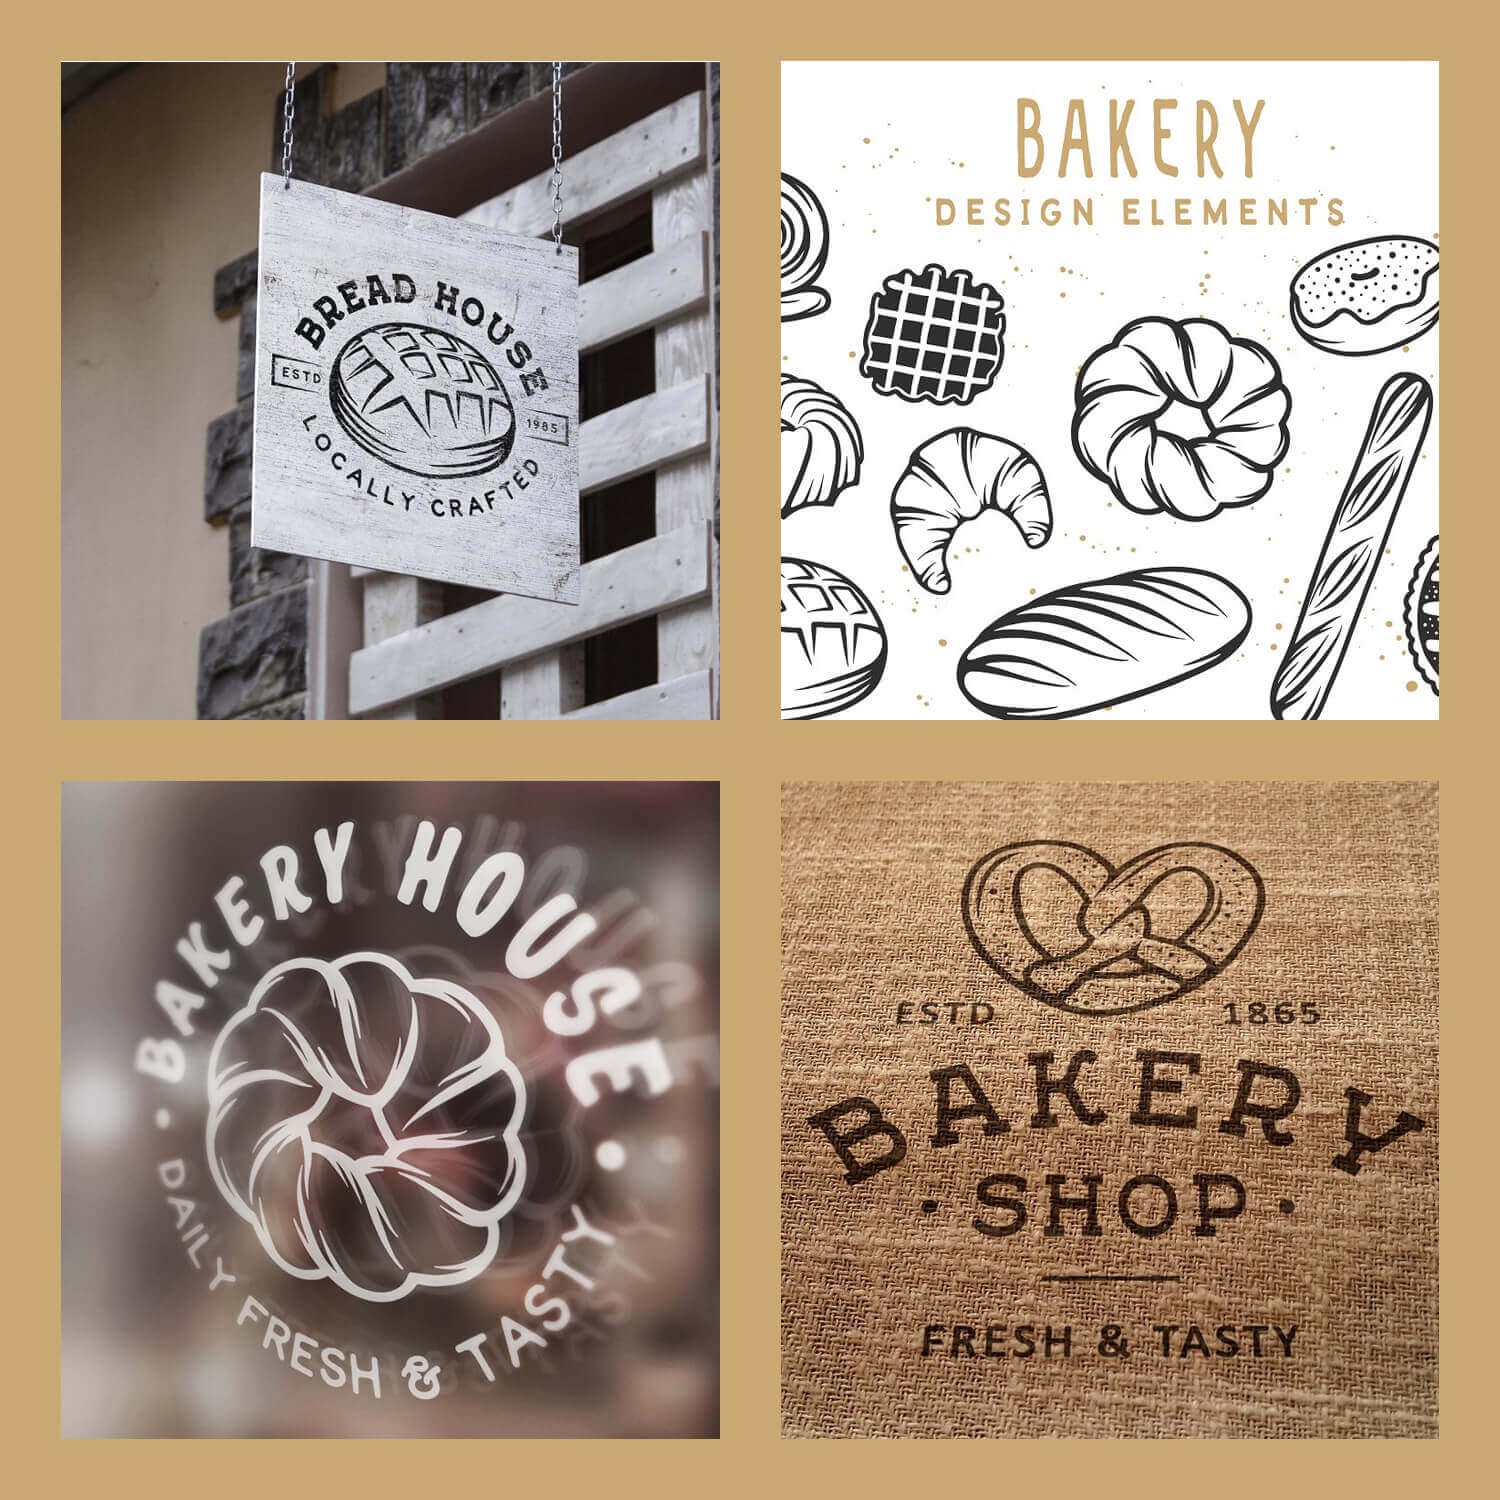 Four square bakery logos and elements on a sand background.